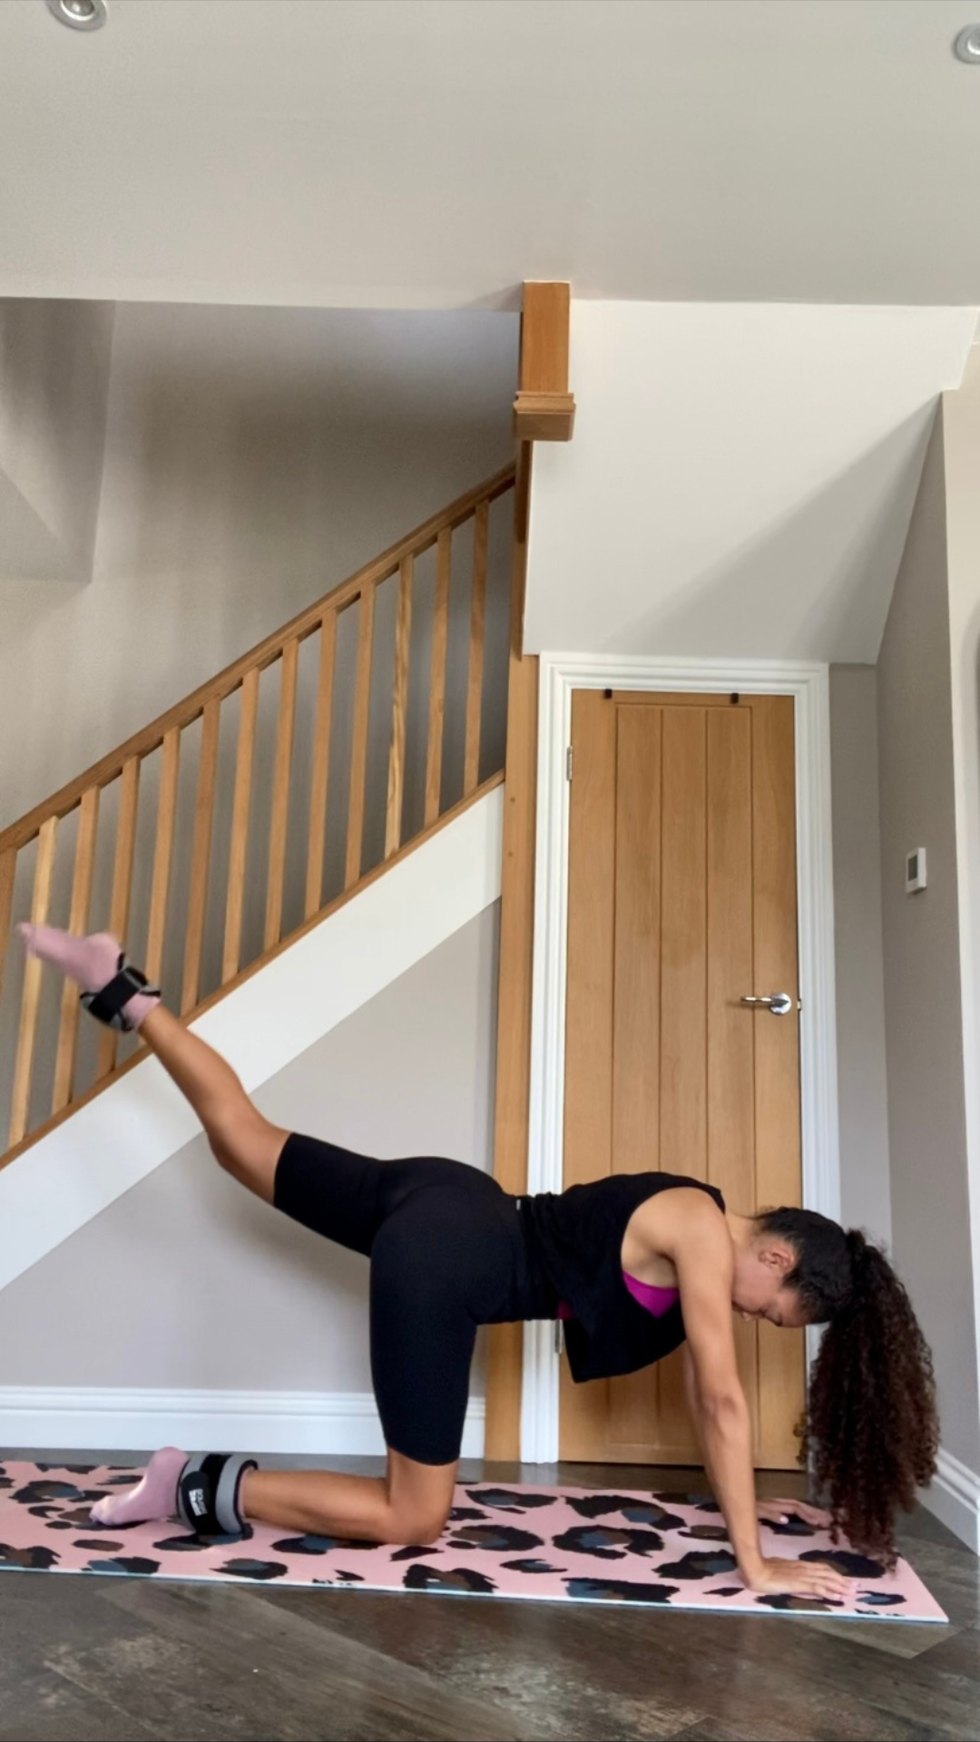 I worked out with ankle weights, here's what happened 